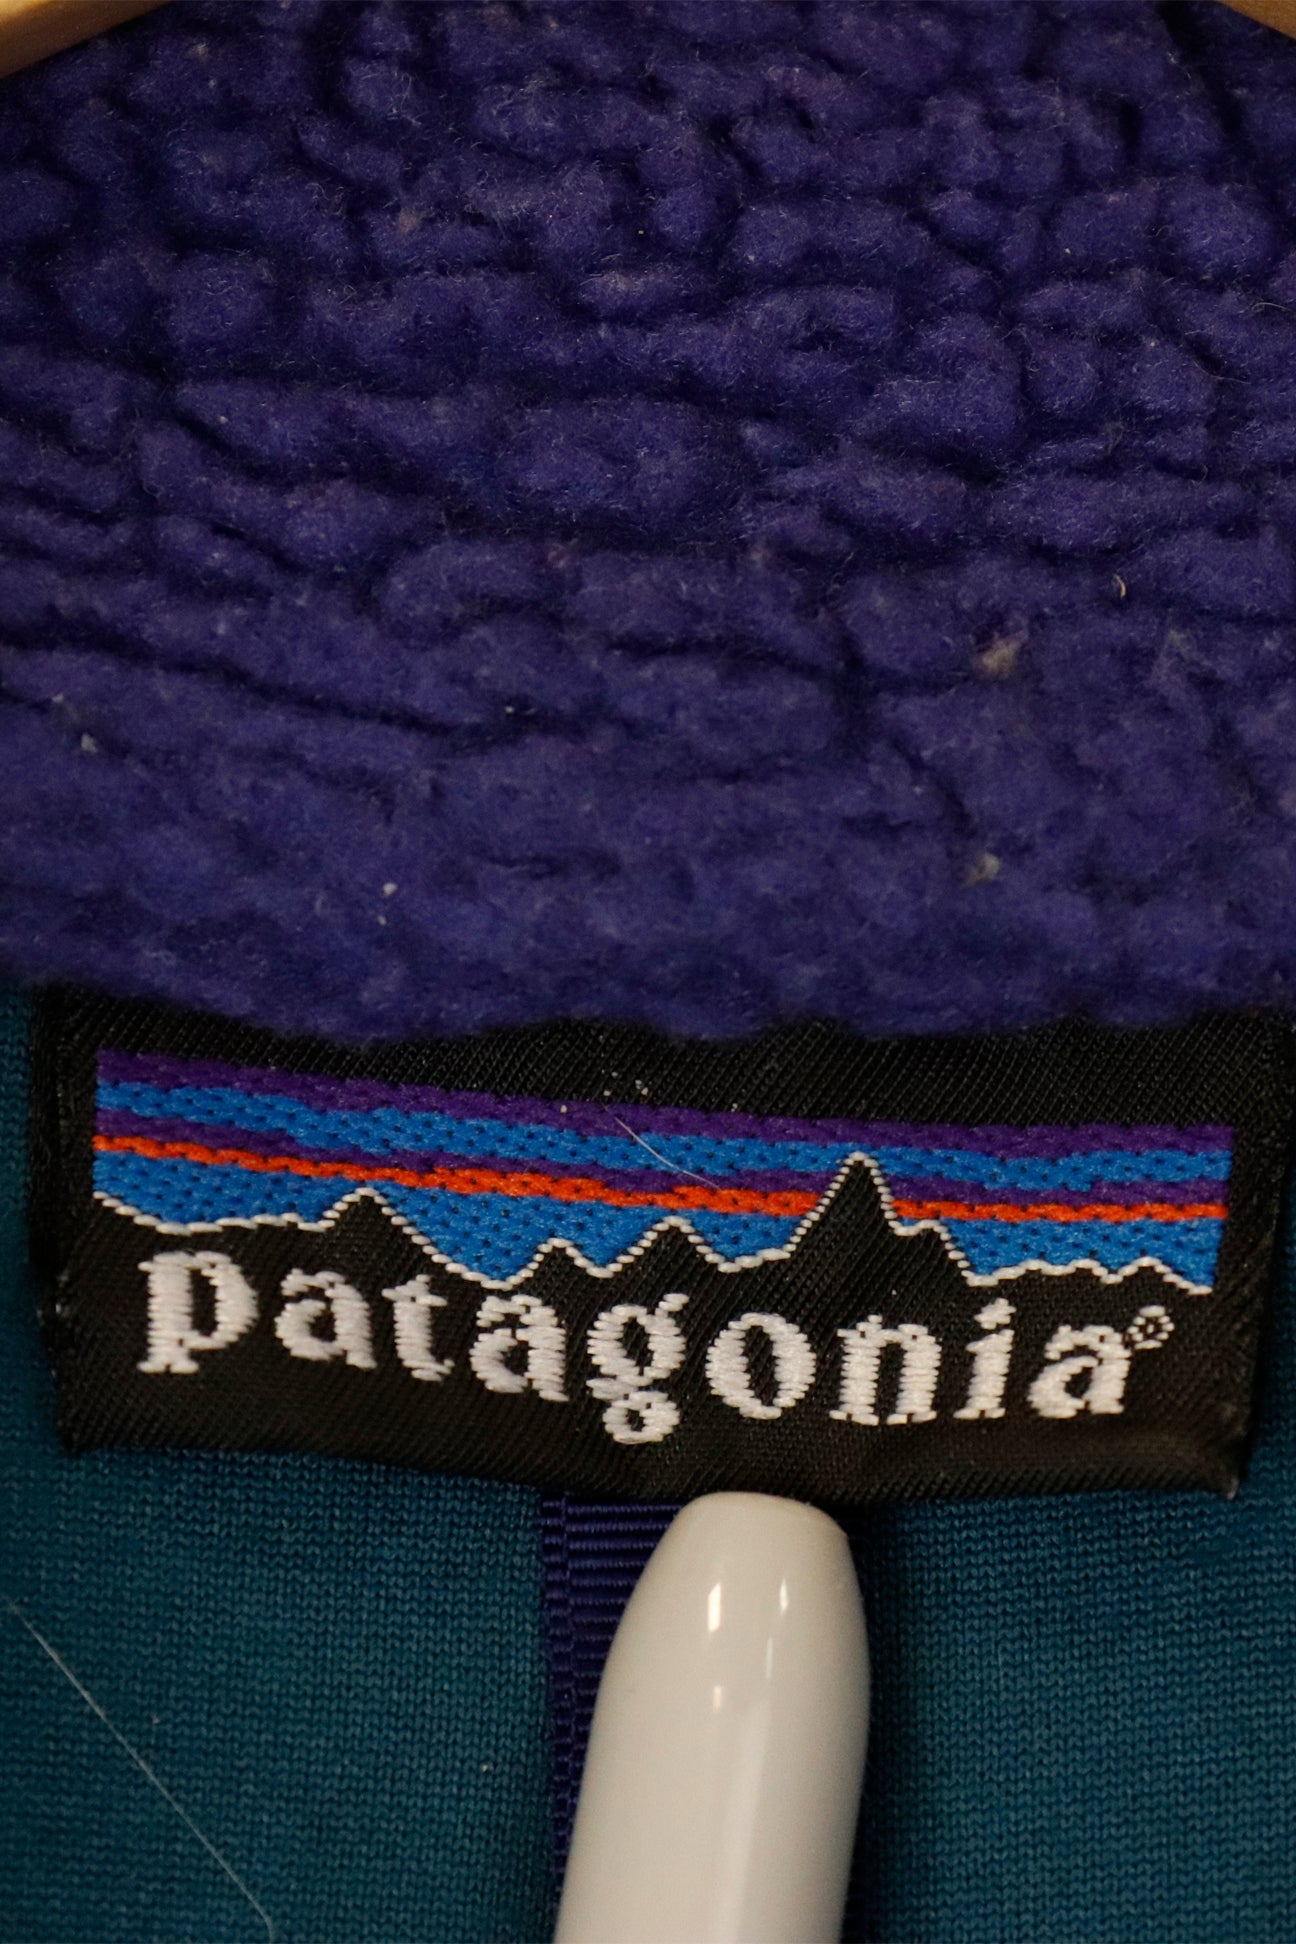 Vintage Patagonia Black Collar And Zipper Jacket Sz M – F As In